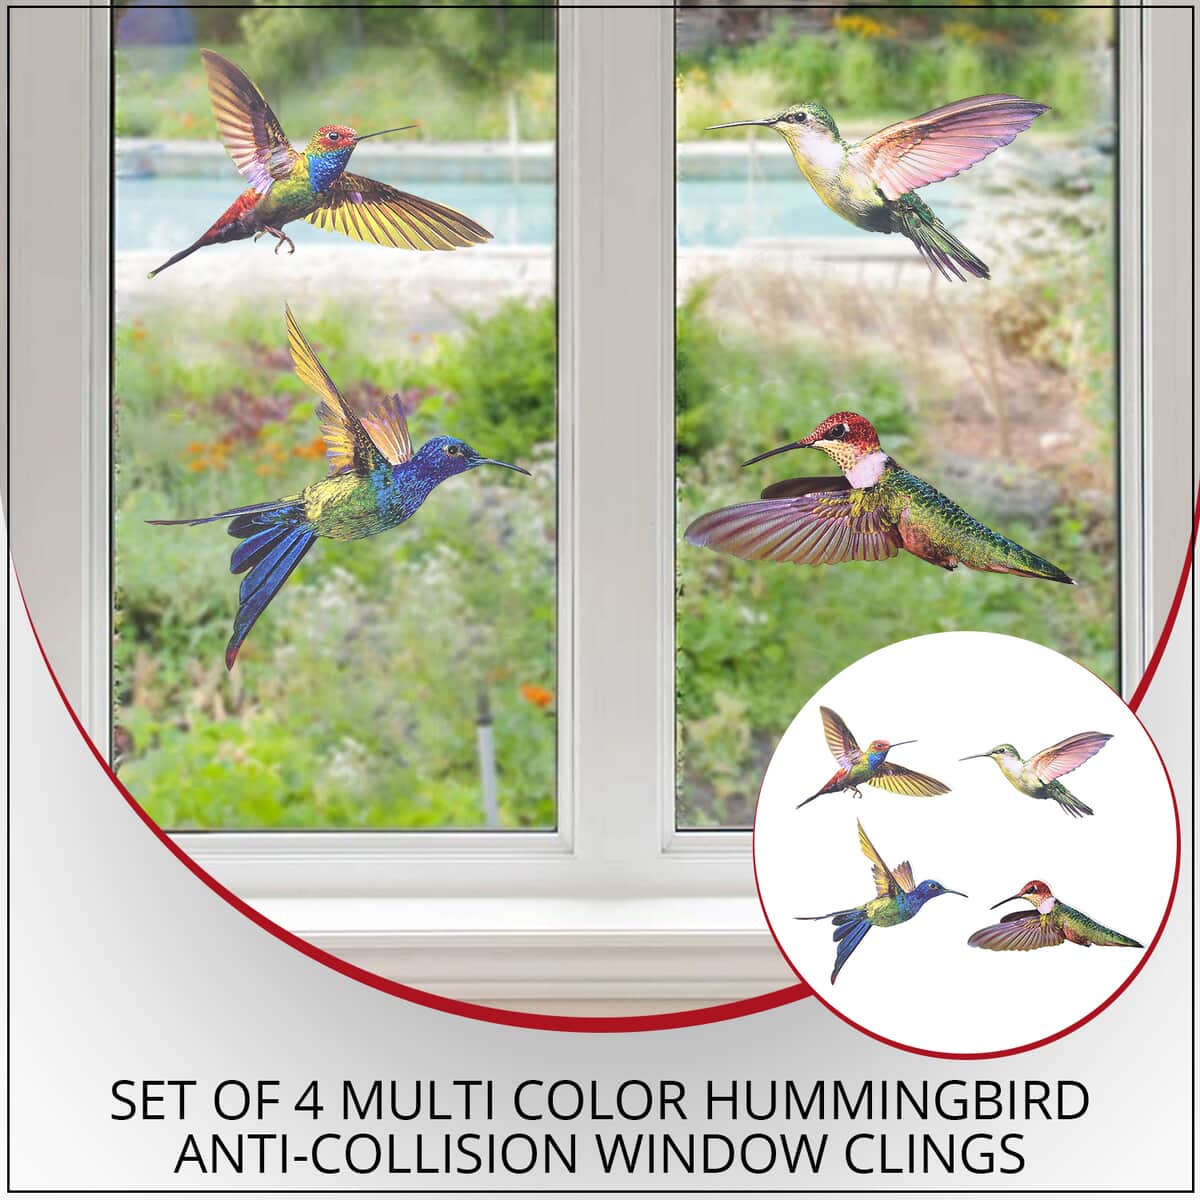 Set of 4 Multi Color Hummingbird Anti-Collision Window Clings (4.33"x5.11") image number 1